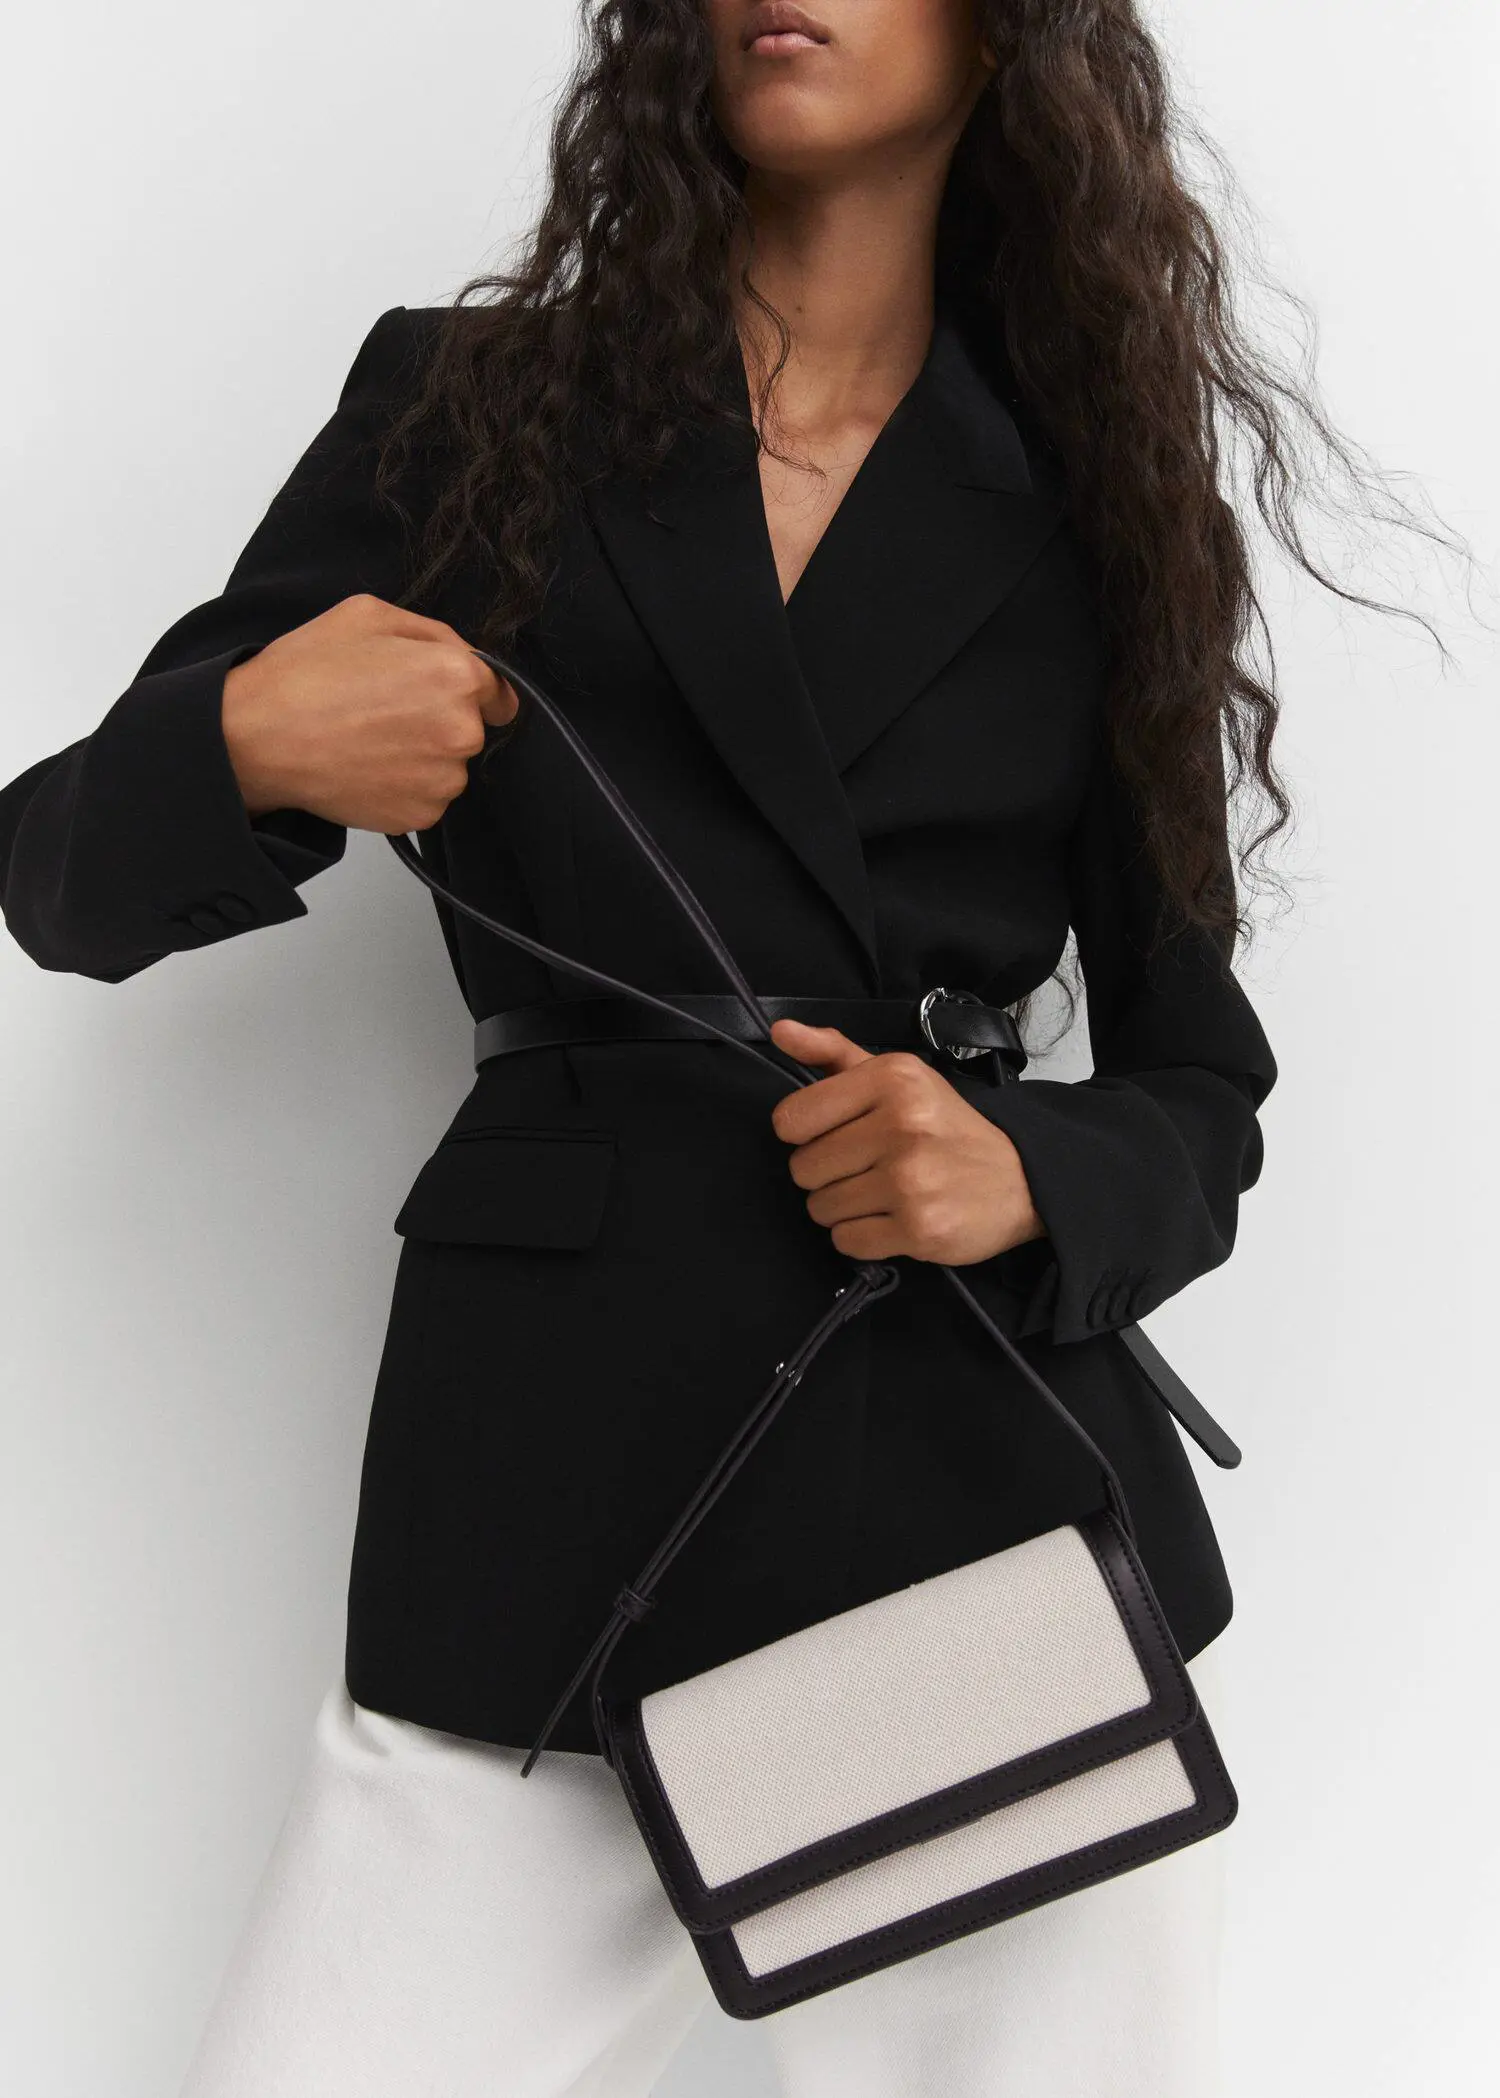 Mango Textured bag with flap. a woman in a black jacket holding a bag. 